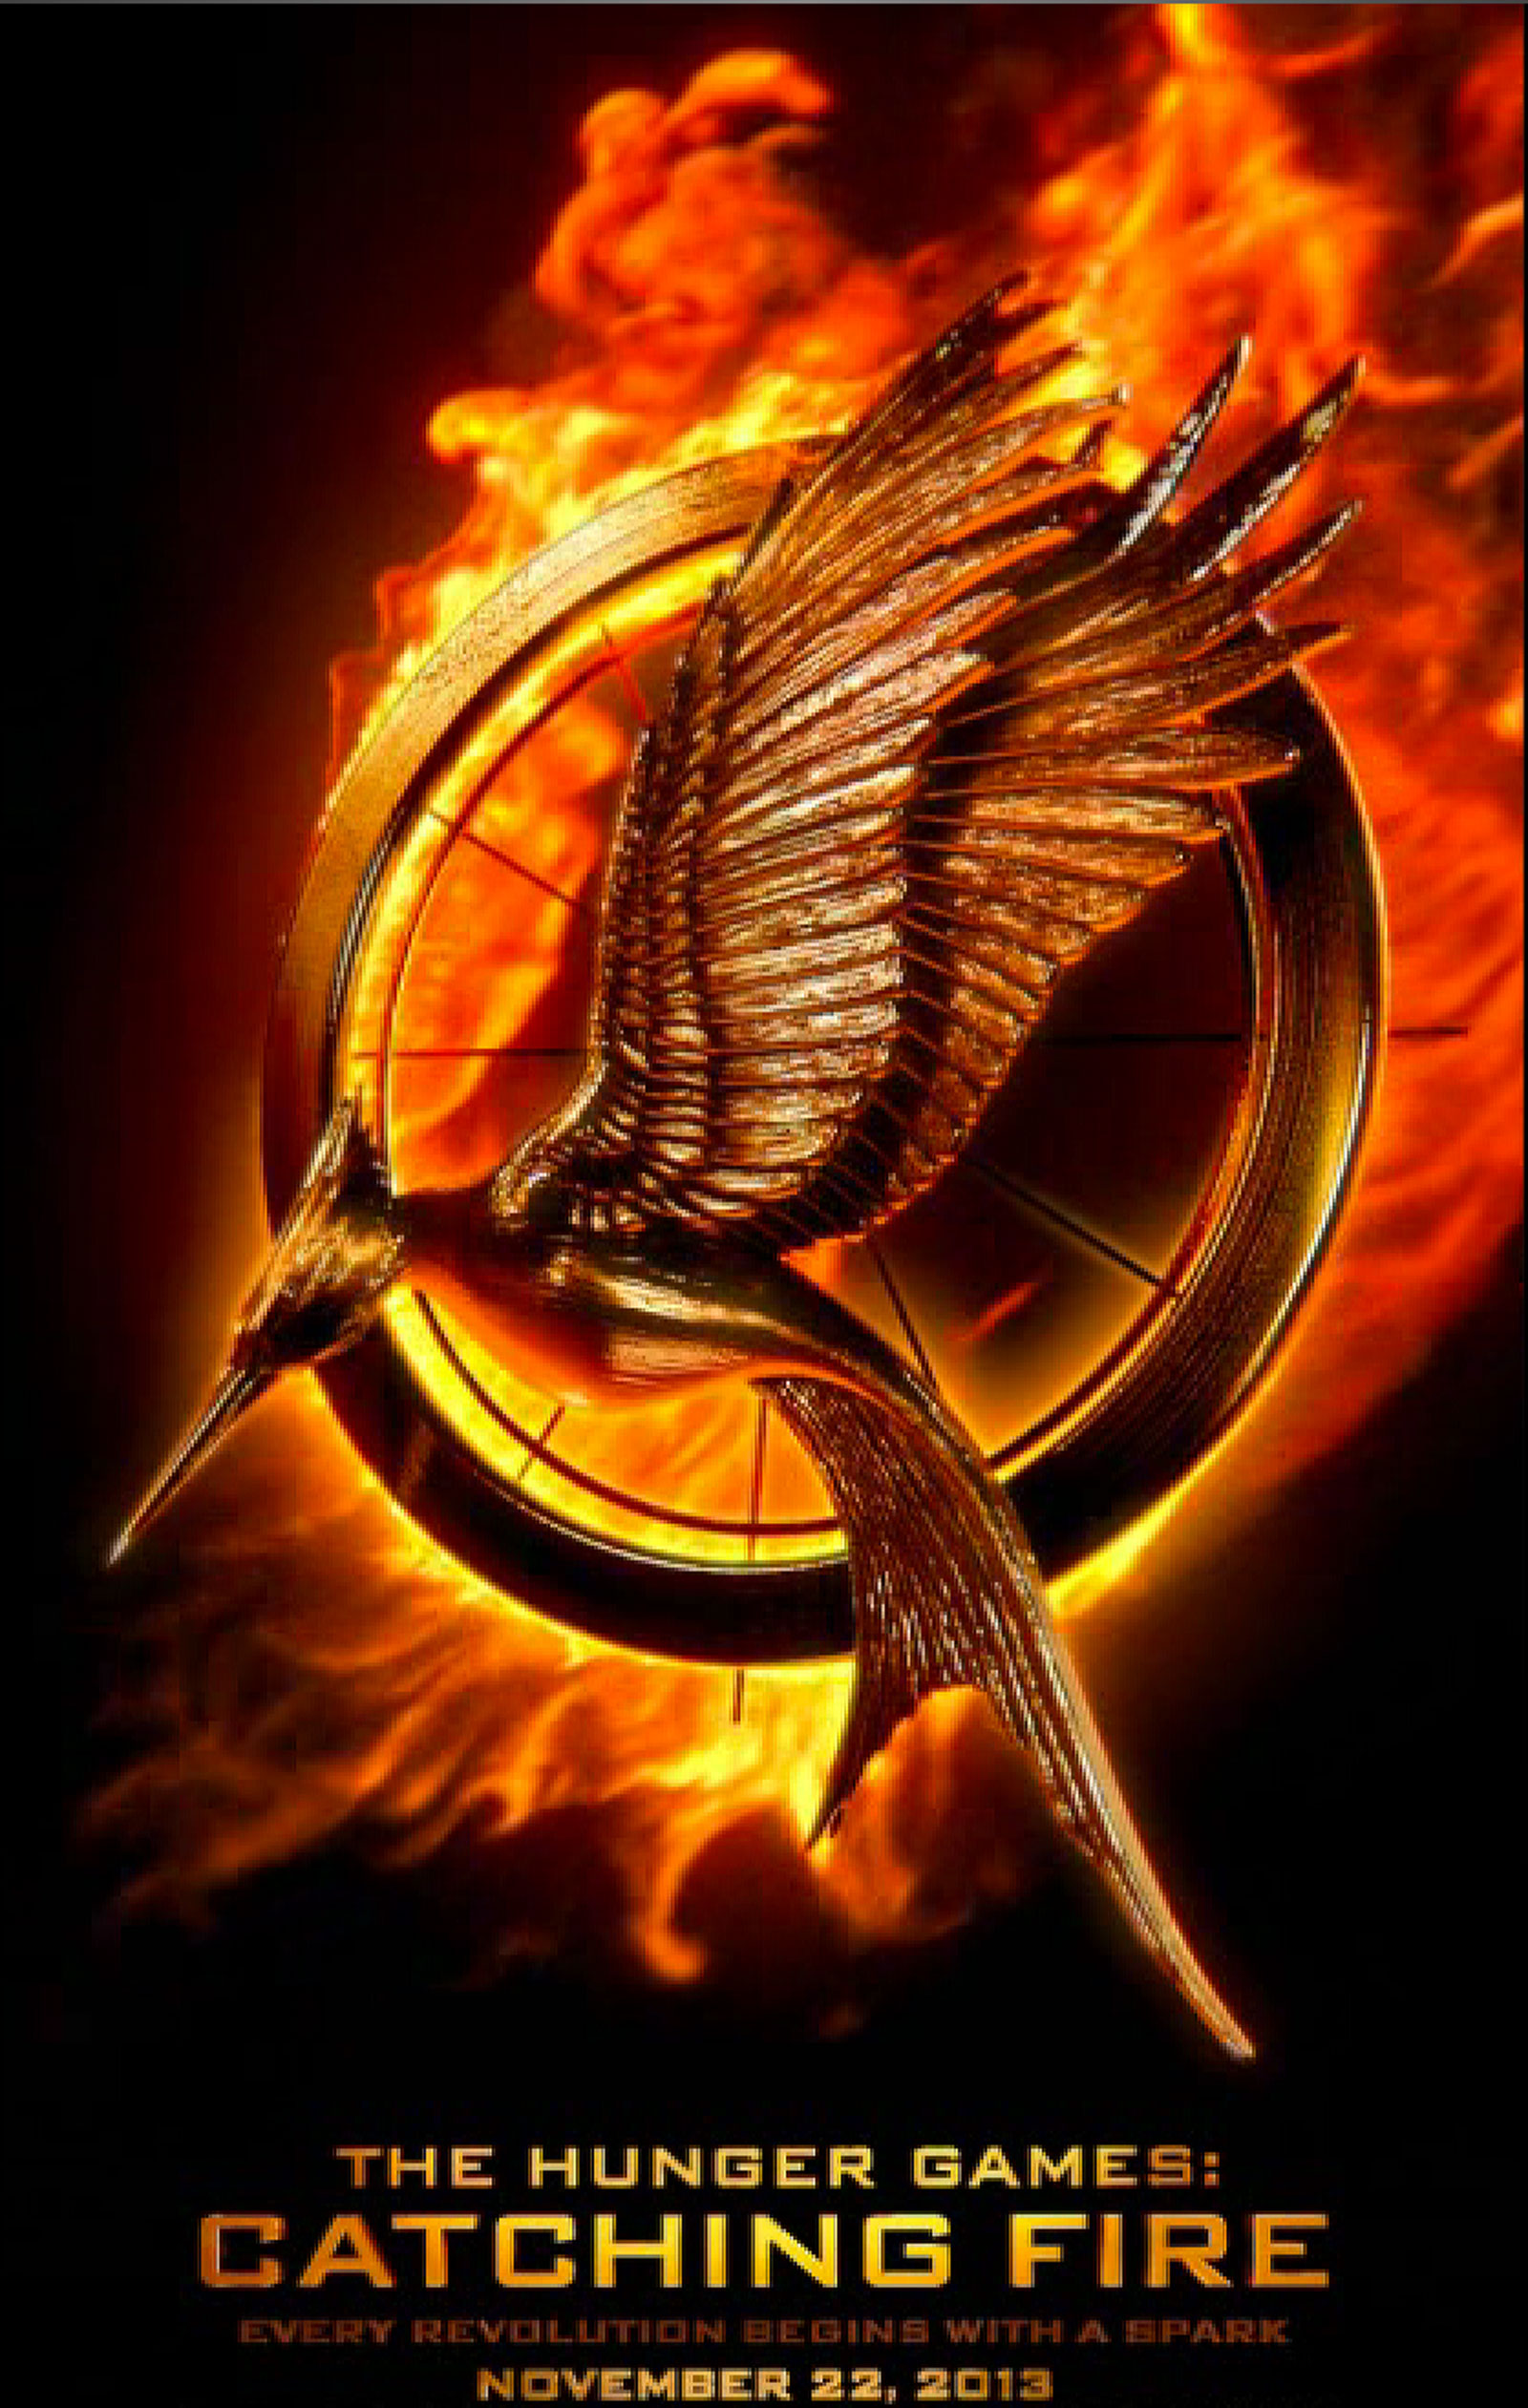 The Hunger Games: Catching Fire #4